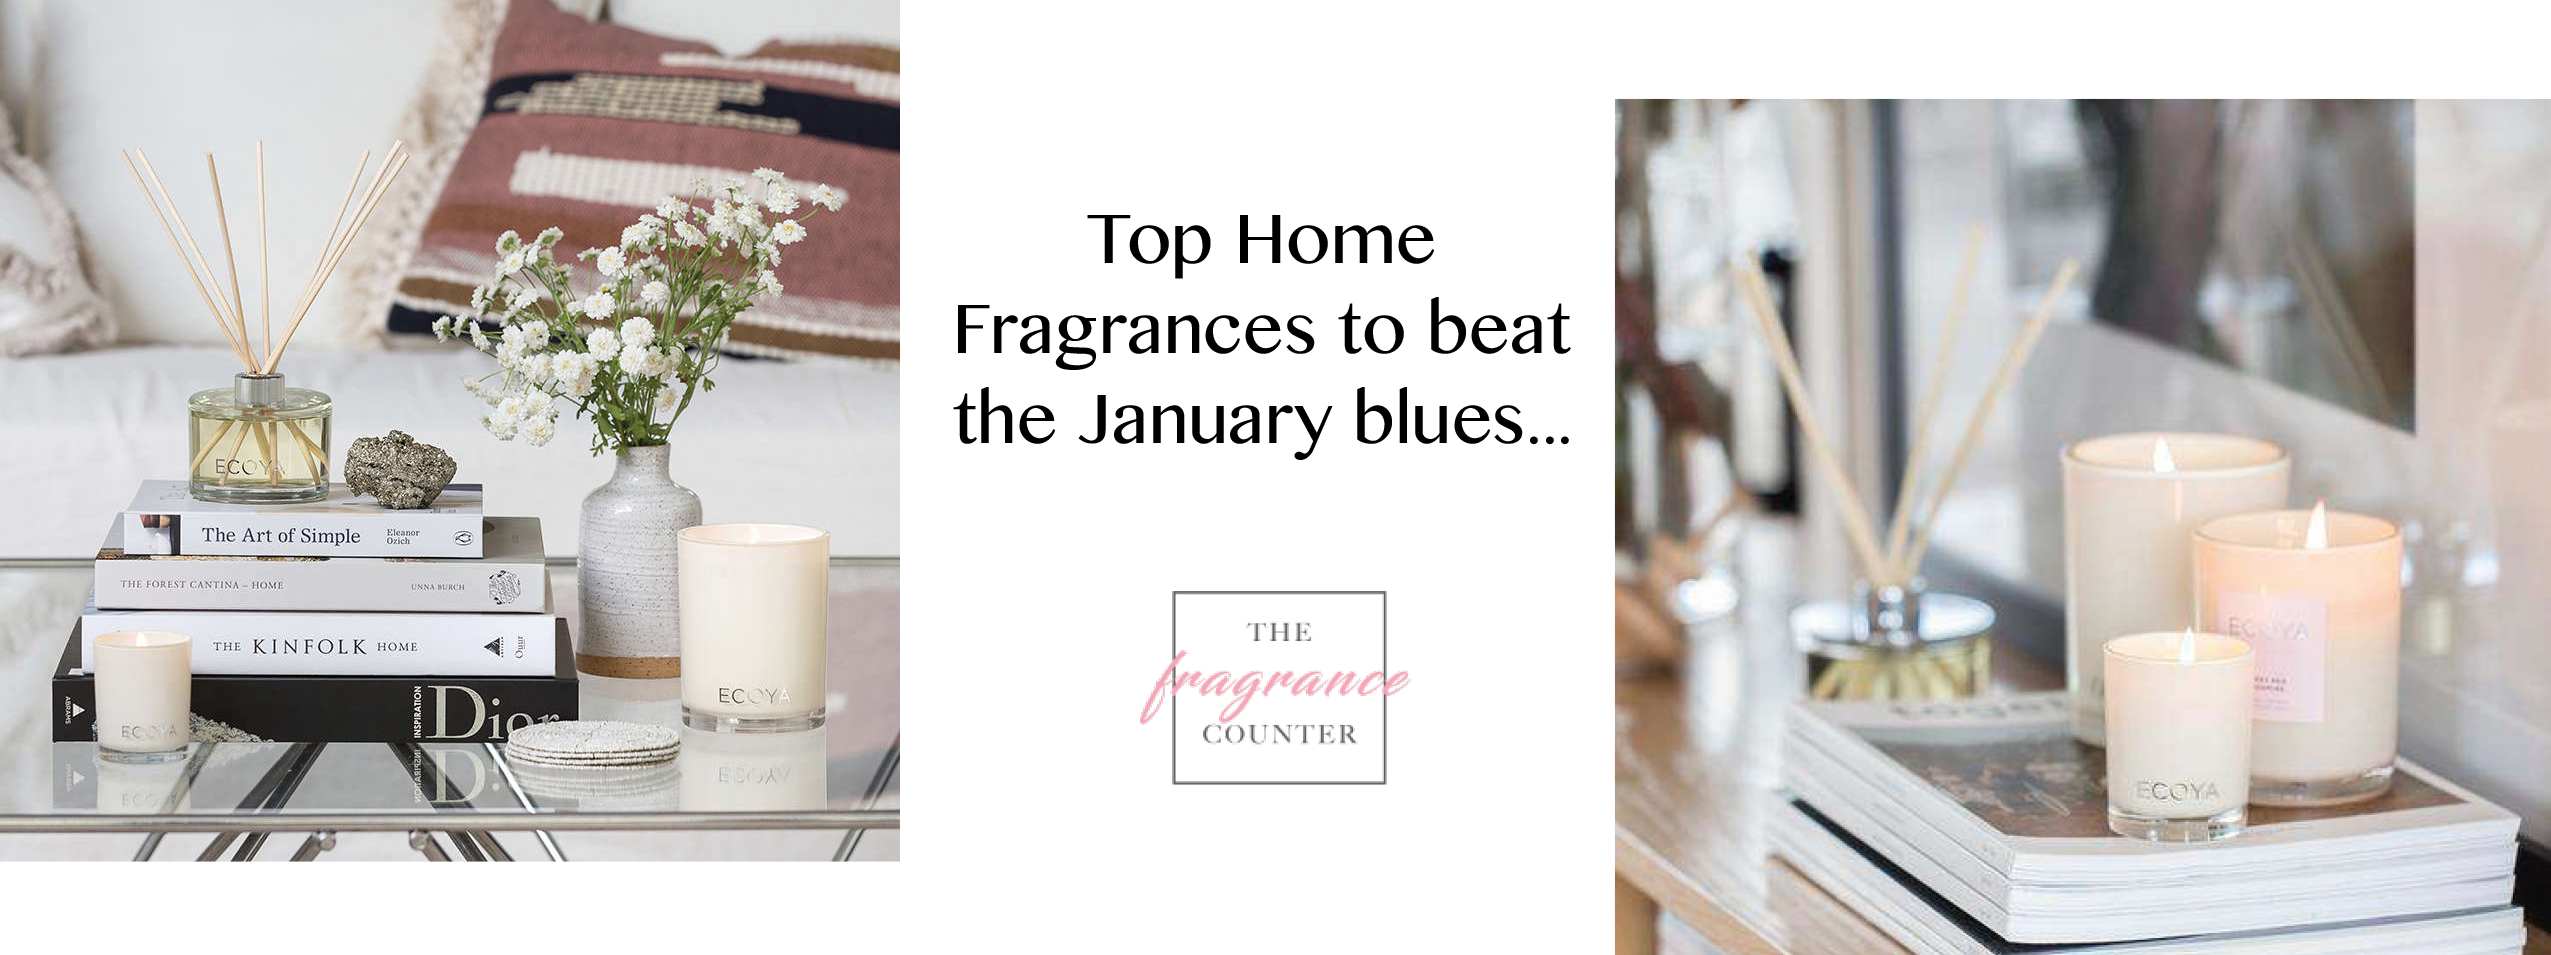 TOP HOME FRAGRANCES TO BEAT THE MID- JANUARY BLUES